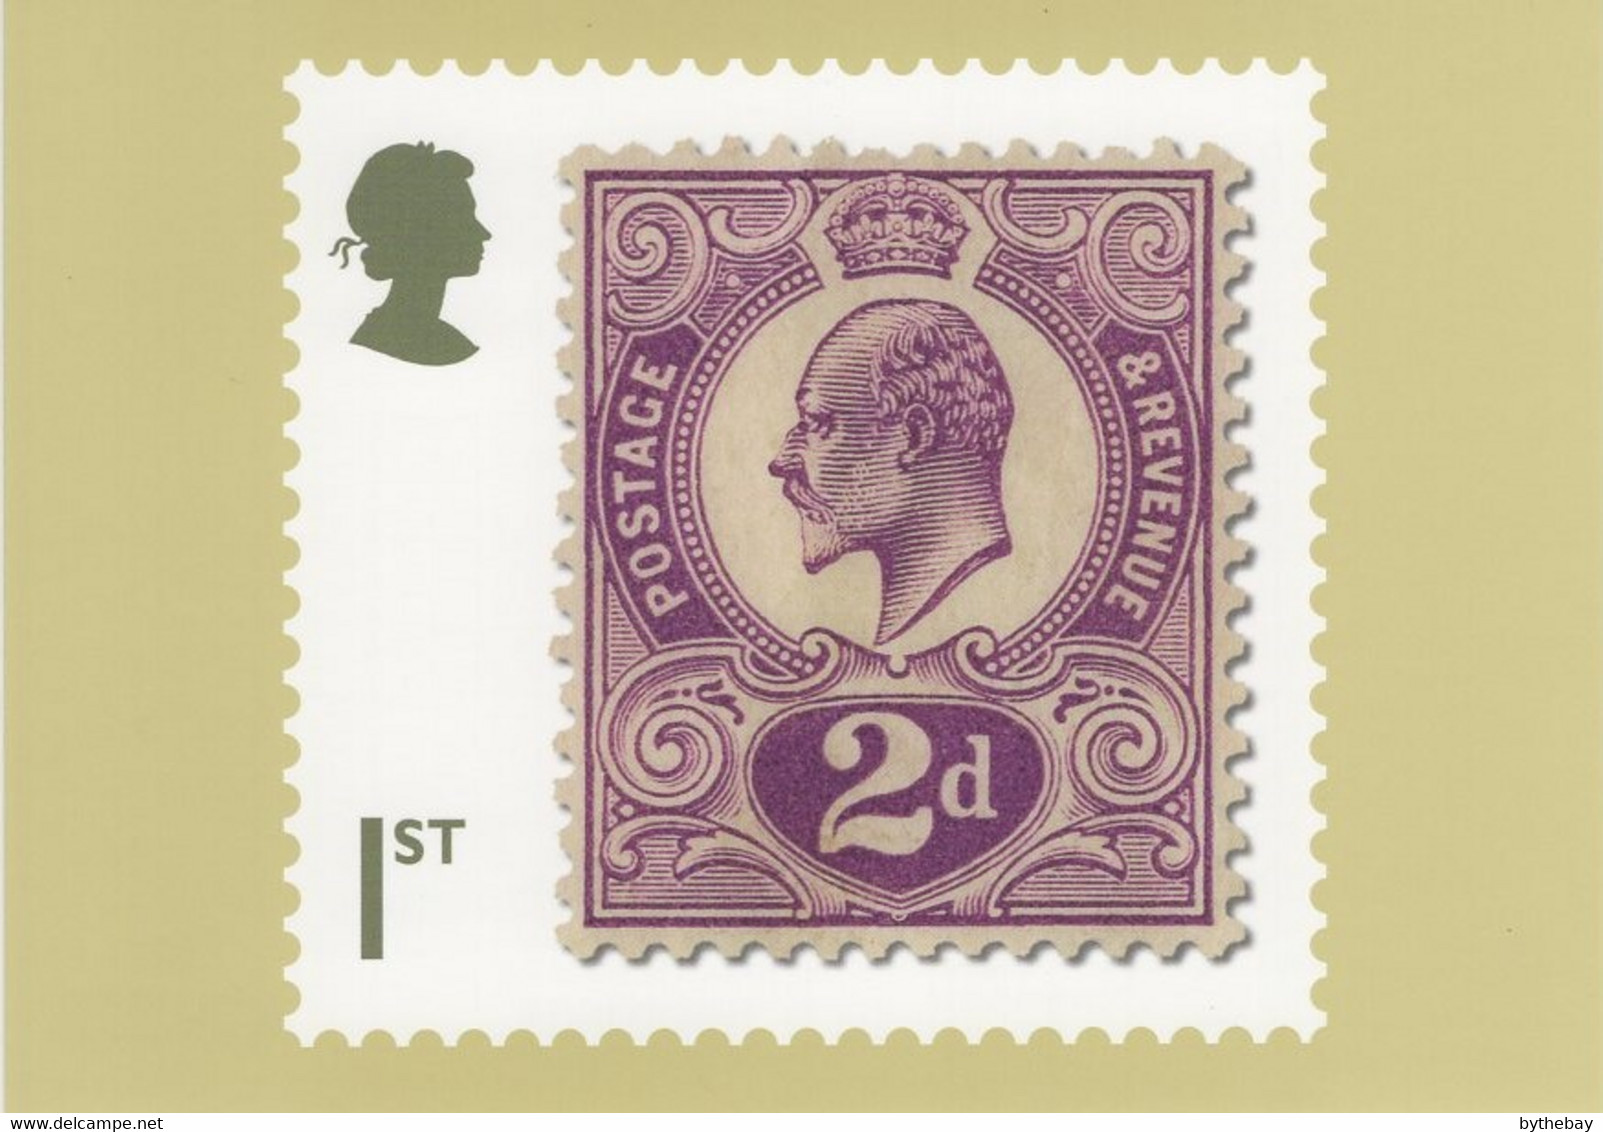 Great Britain 2019 PHQ Card Sc 3802b 1st 1p Edward VII Unissued Classic British Stamps - PHQ Cards